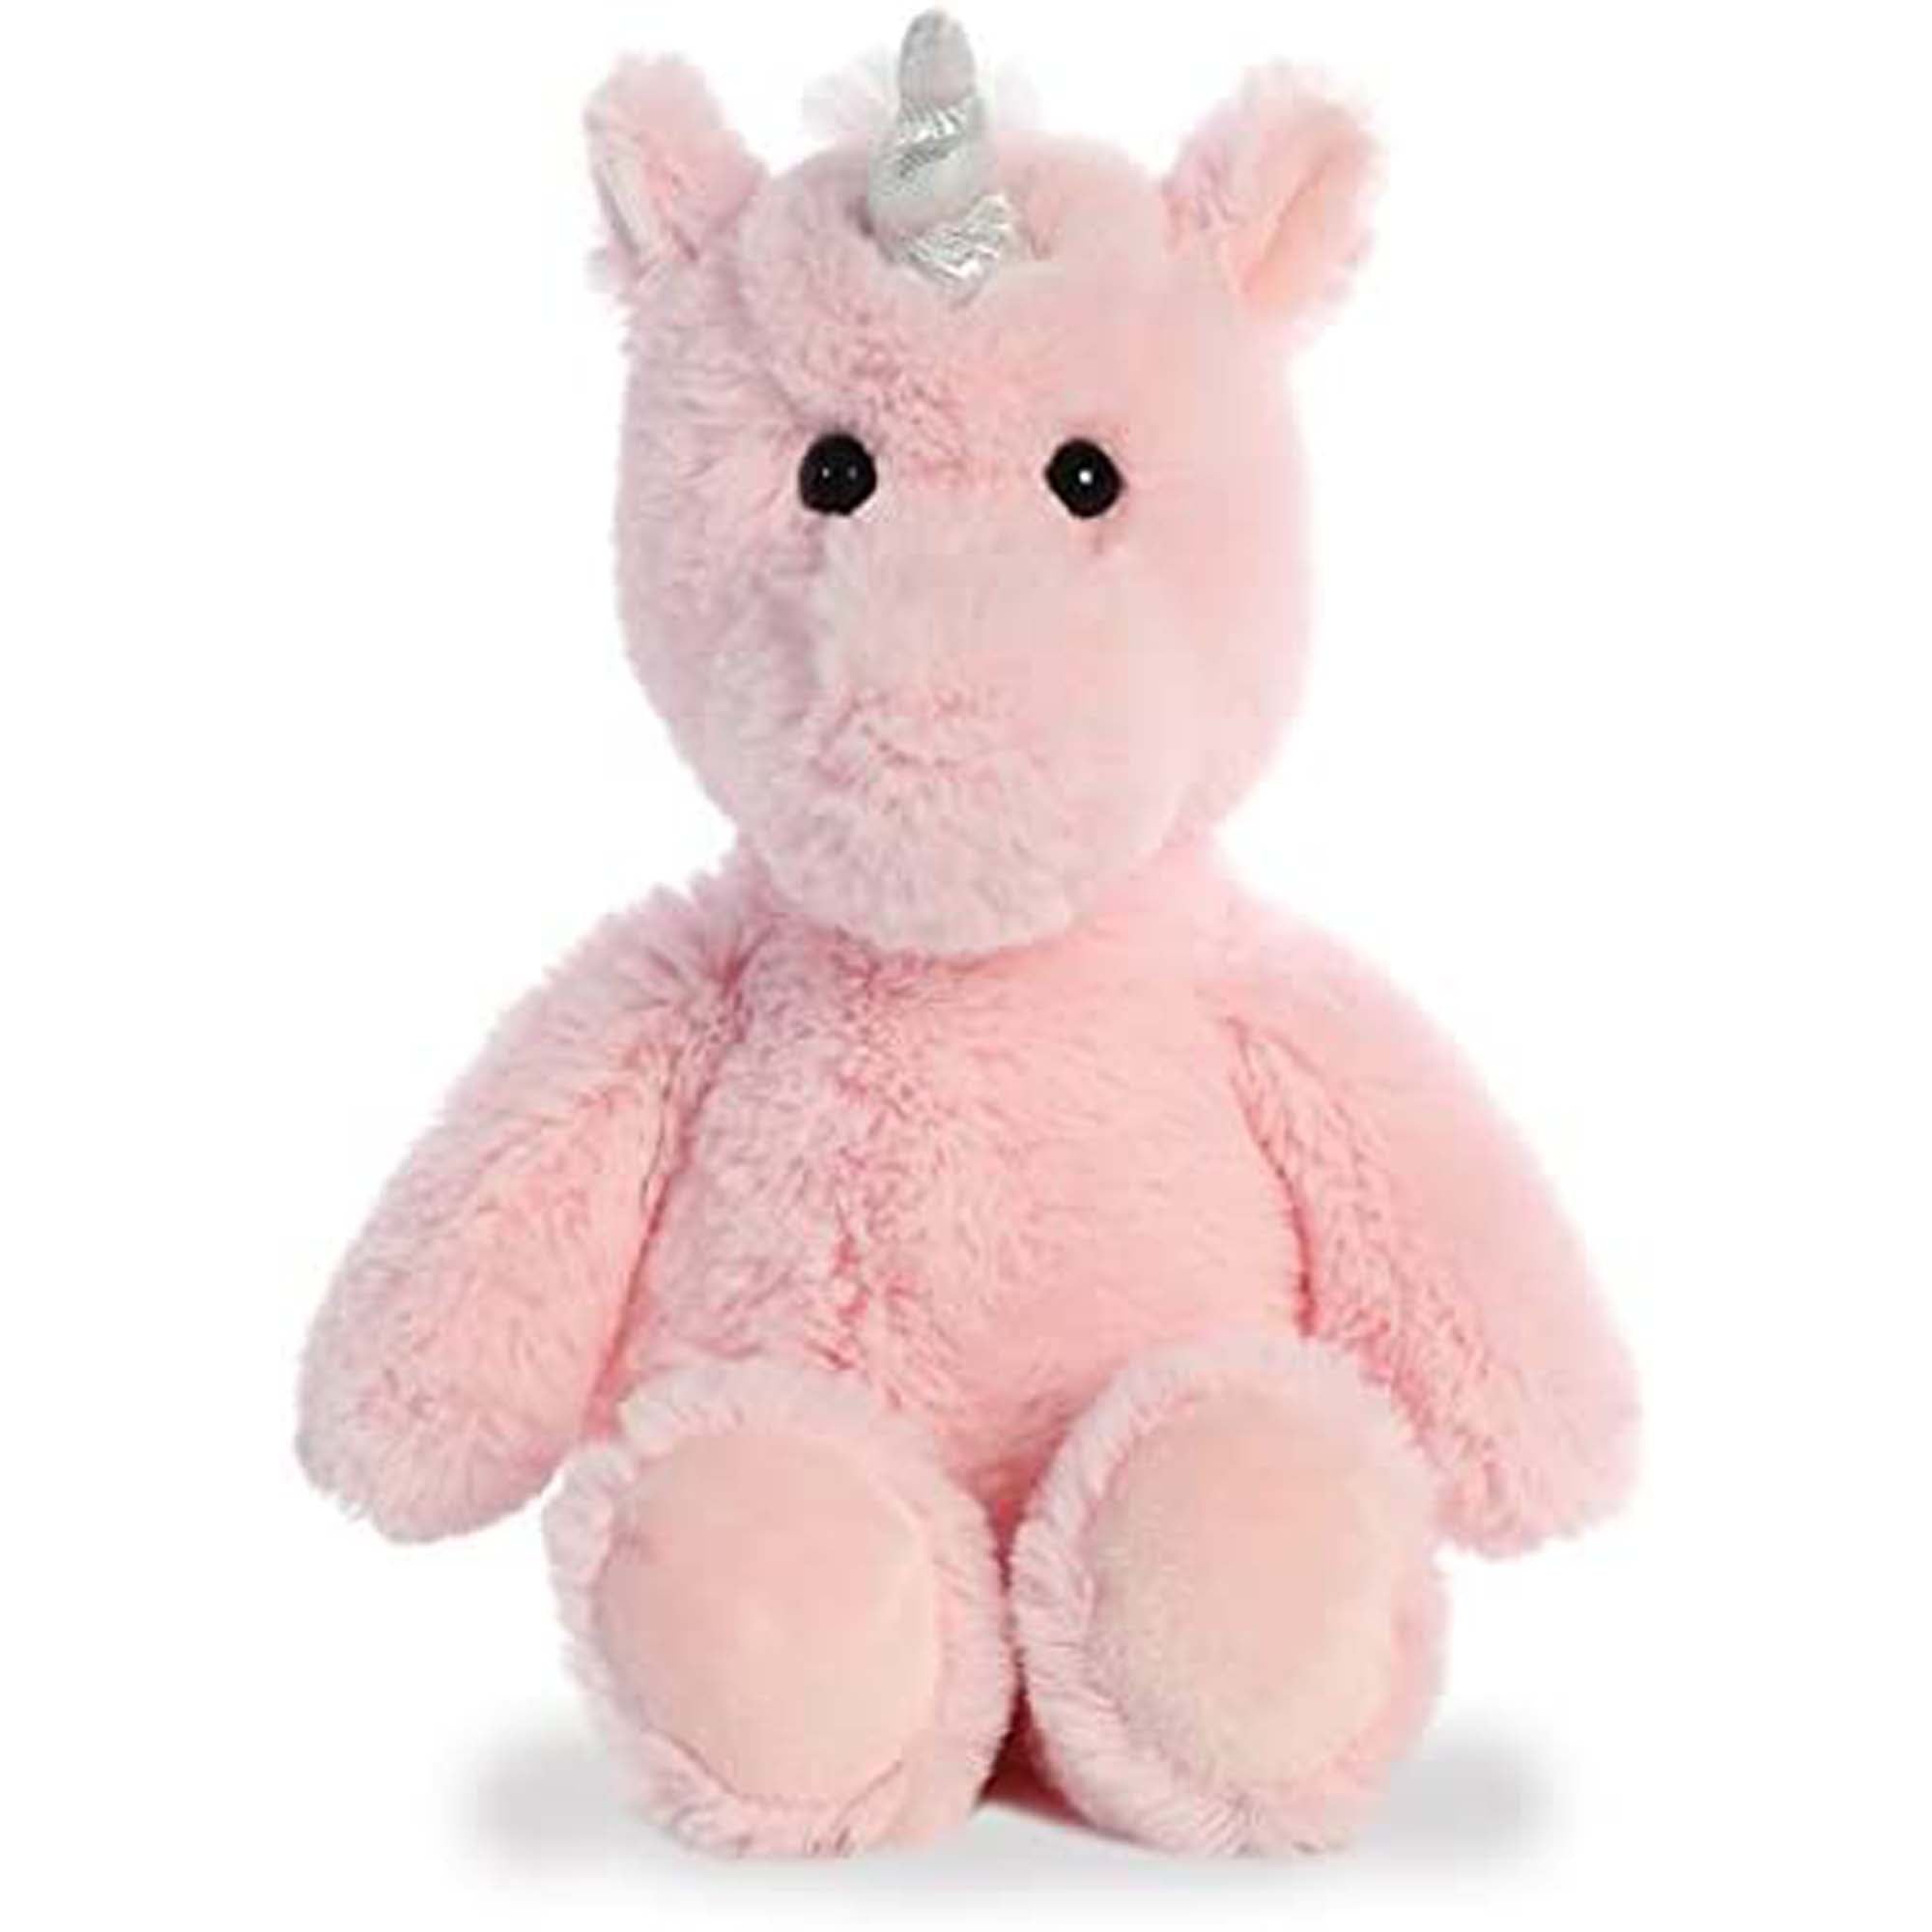 Pink Unicorn Plush, 12 Inches, 1 Count